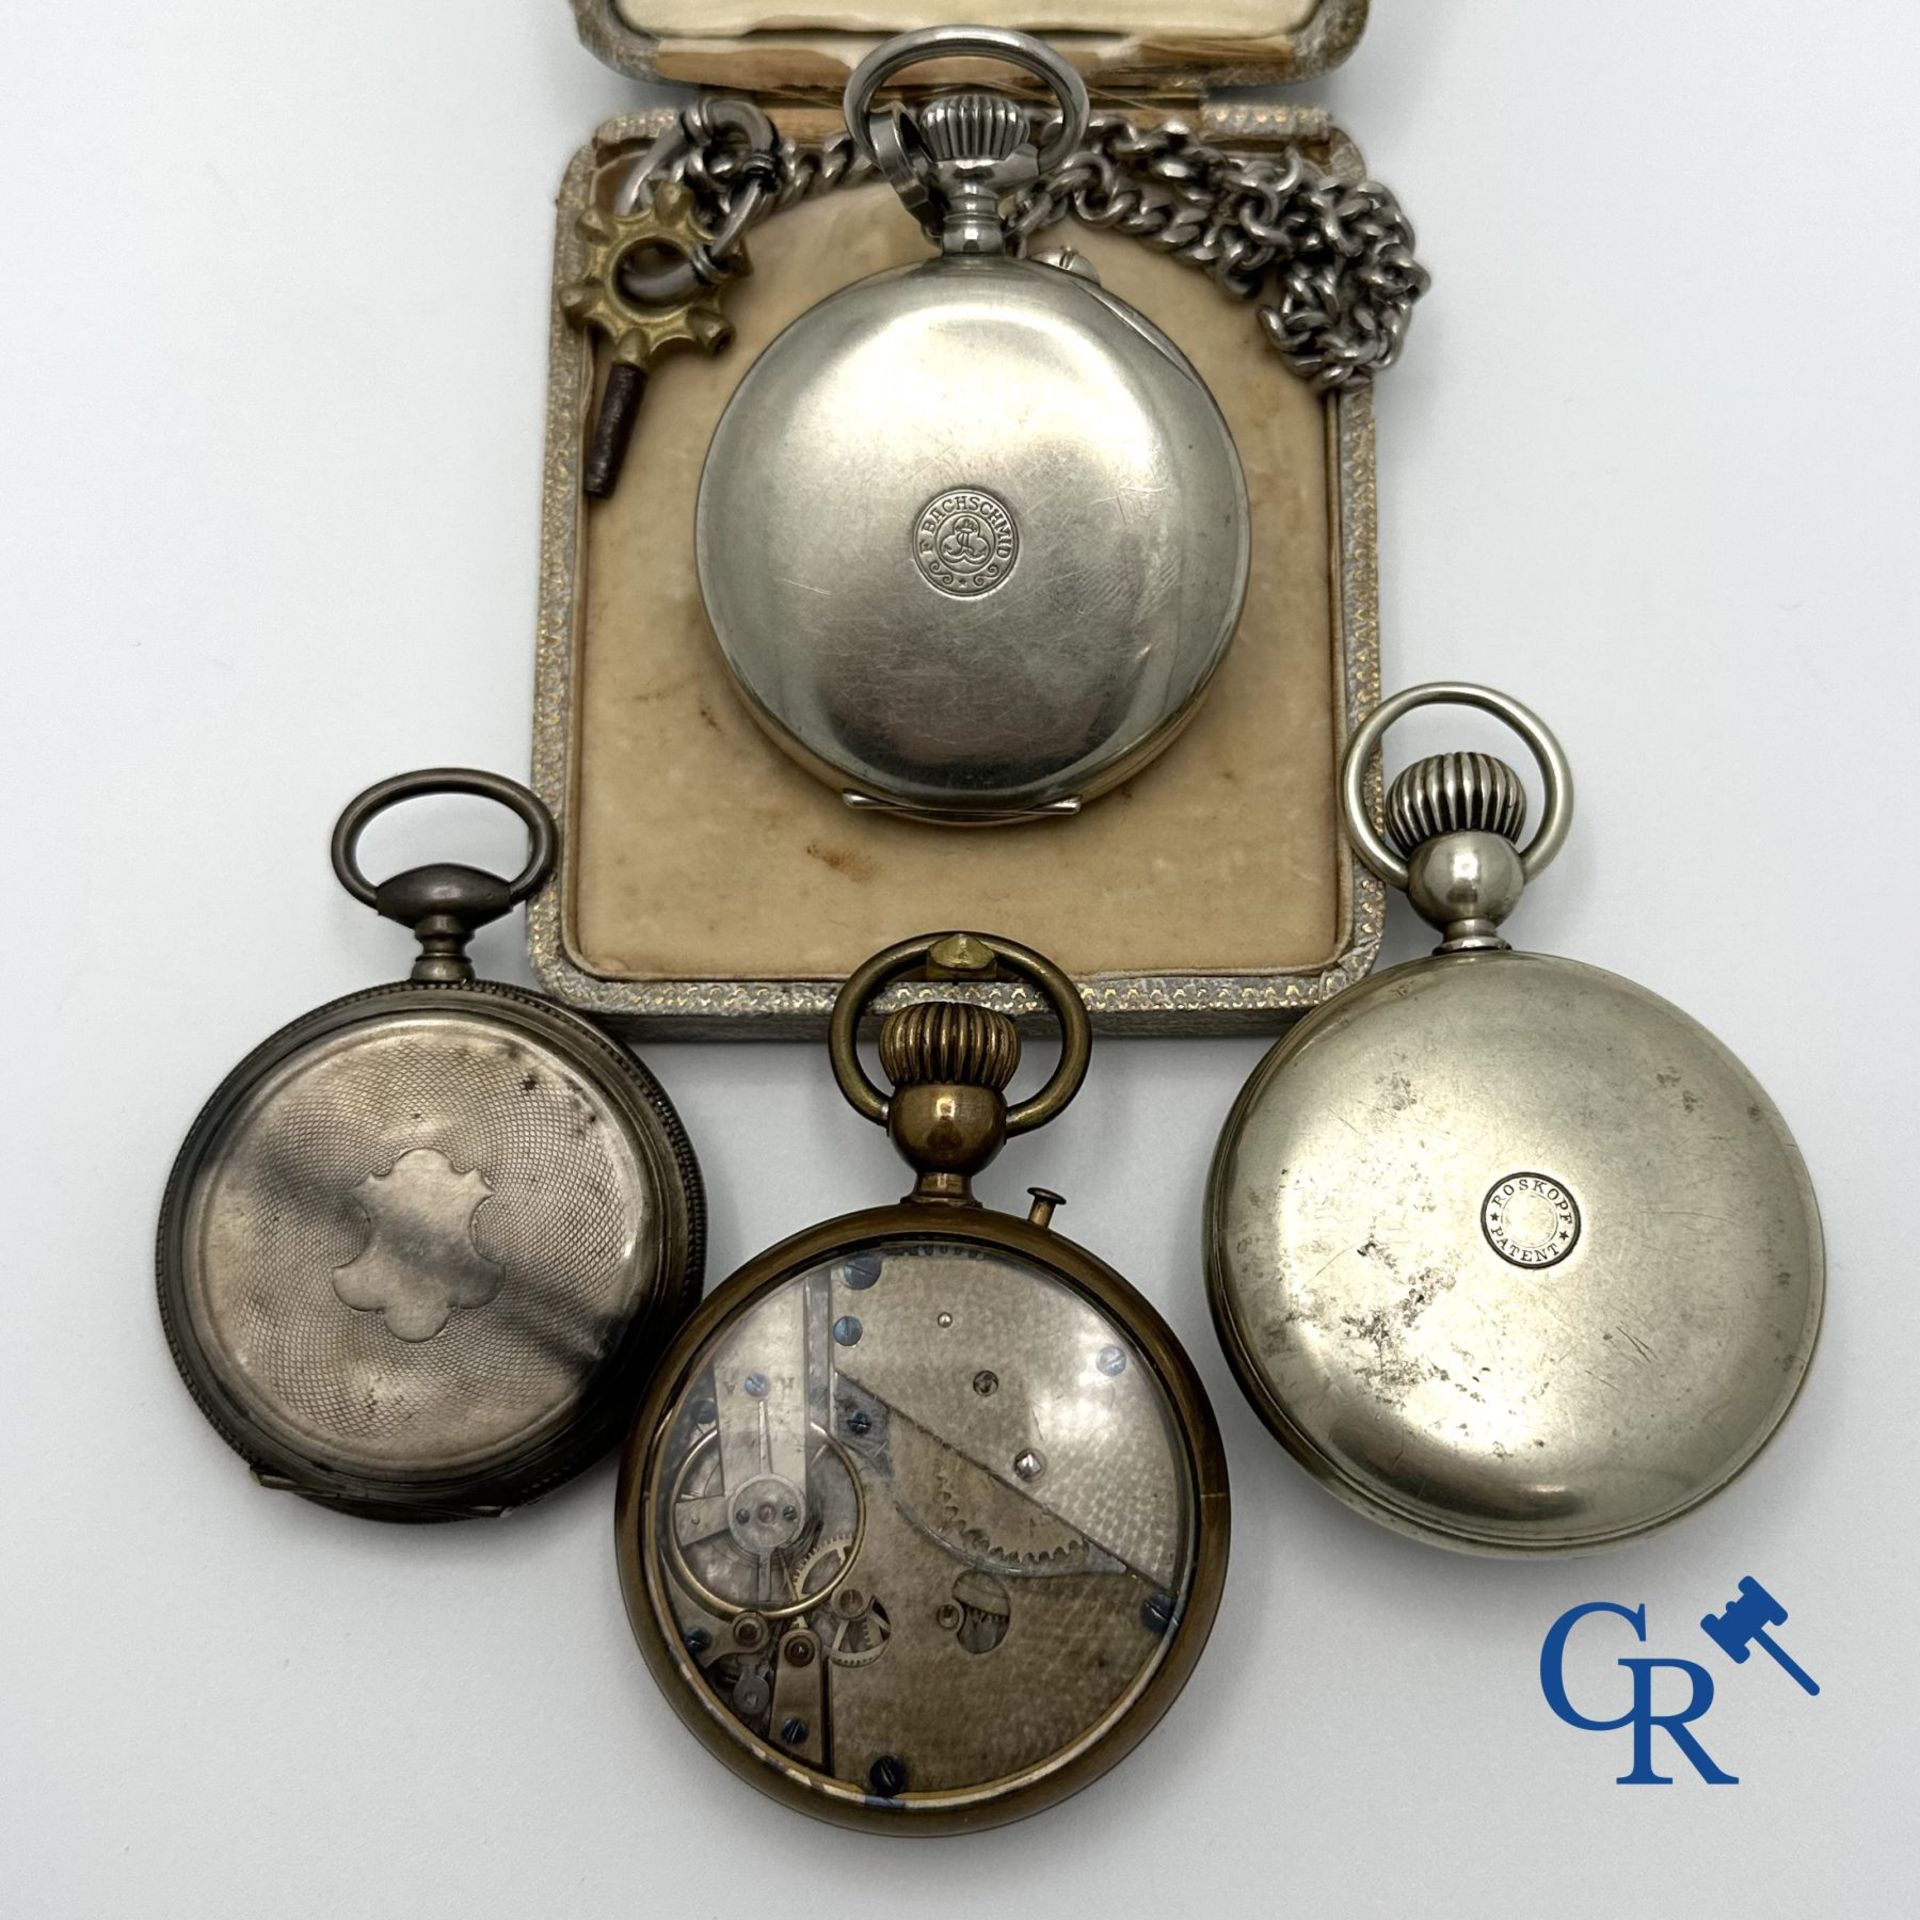 Watches: Lot of 4 old pocket watches. - Image 2 of 4